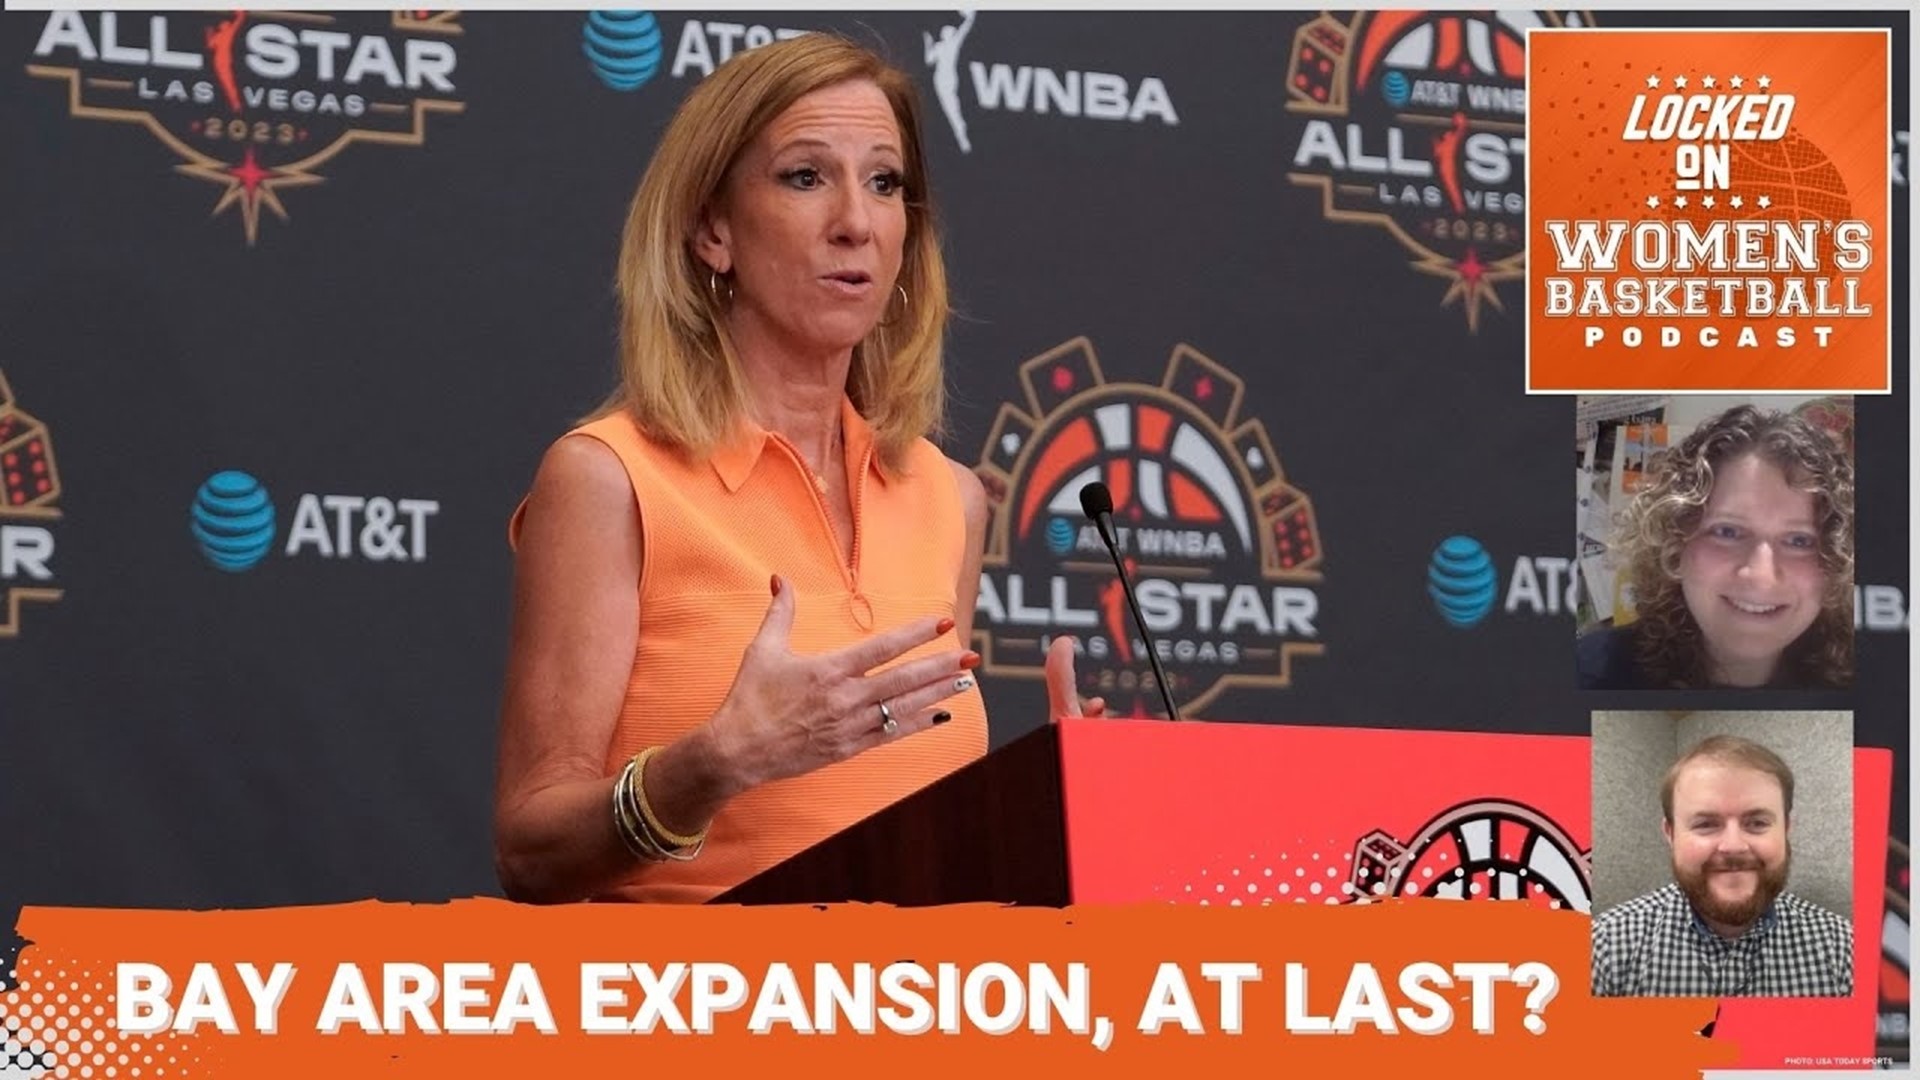 What did we learn from the report that the ownership group of the Golden State Warriors is finalizing an agreement to bring a WNBA team to the Bay Area?